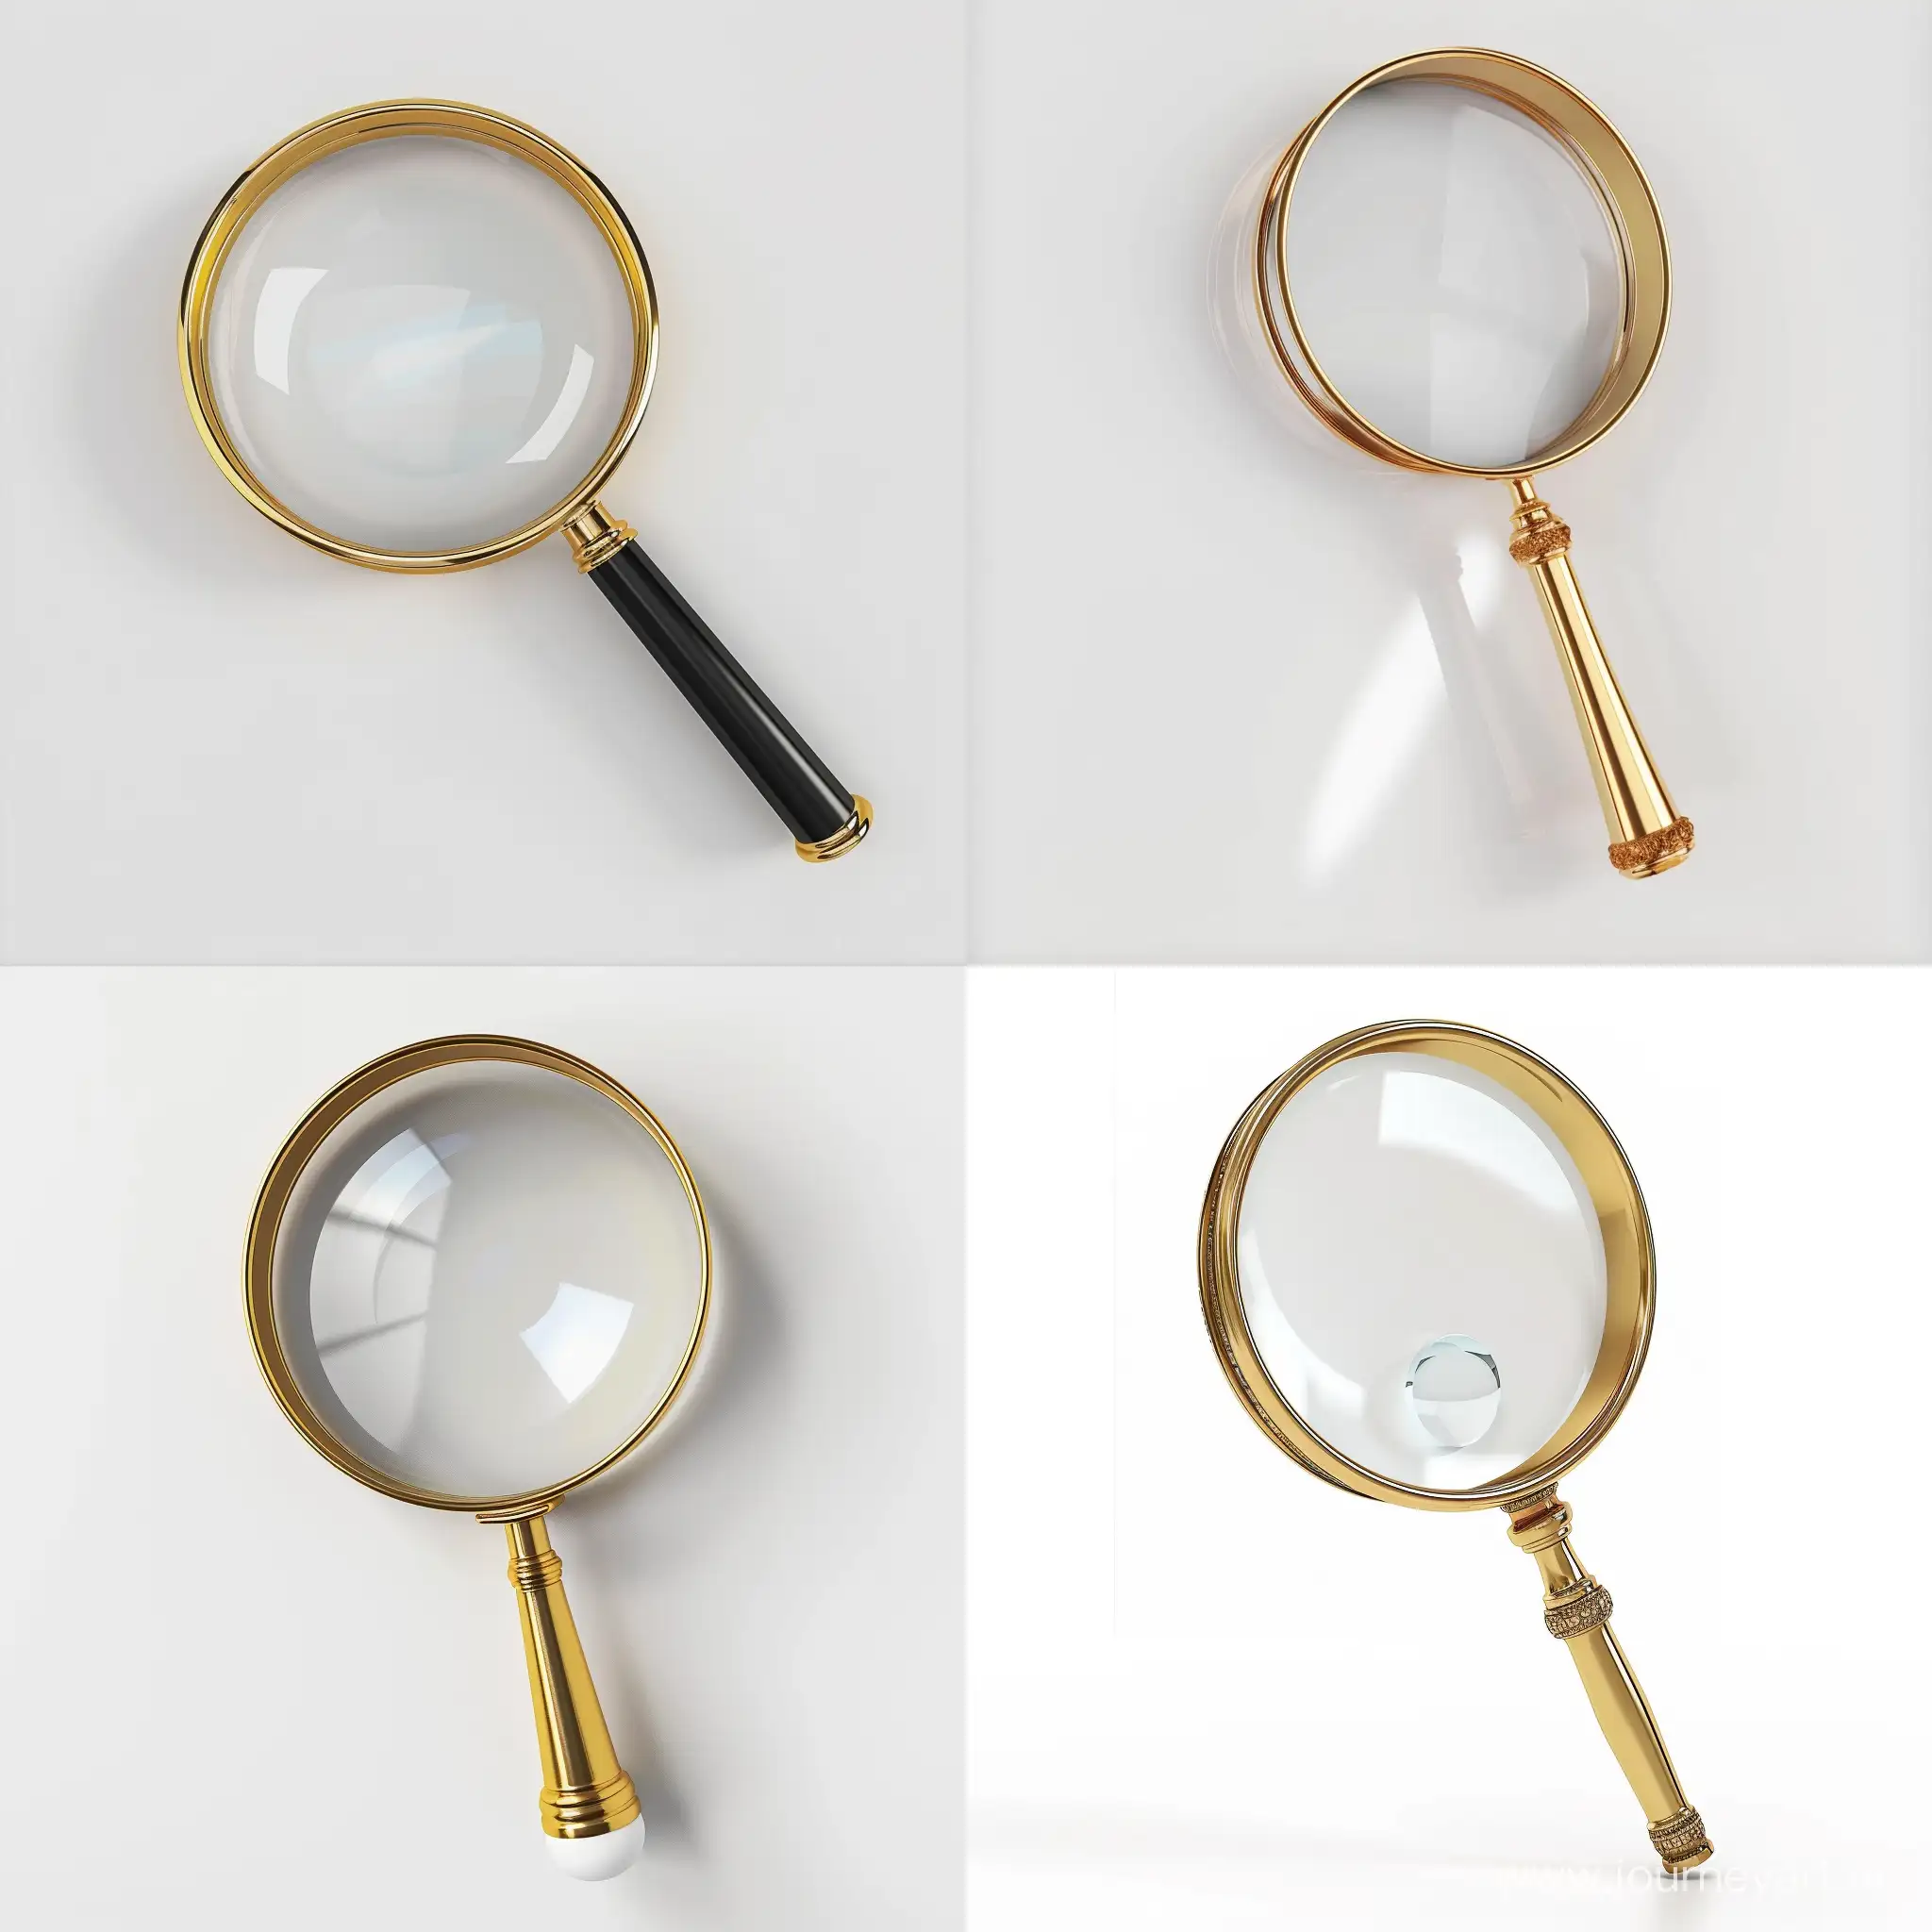 magnifying glass 3d render, on white background